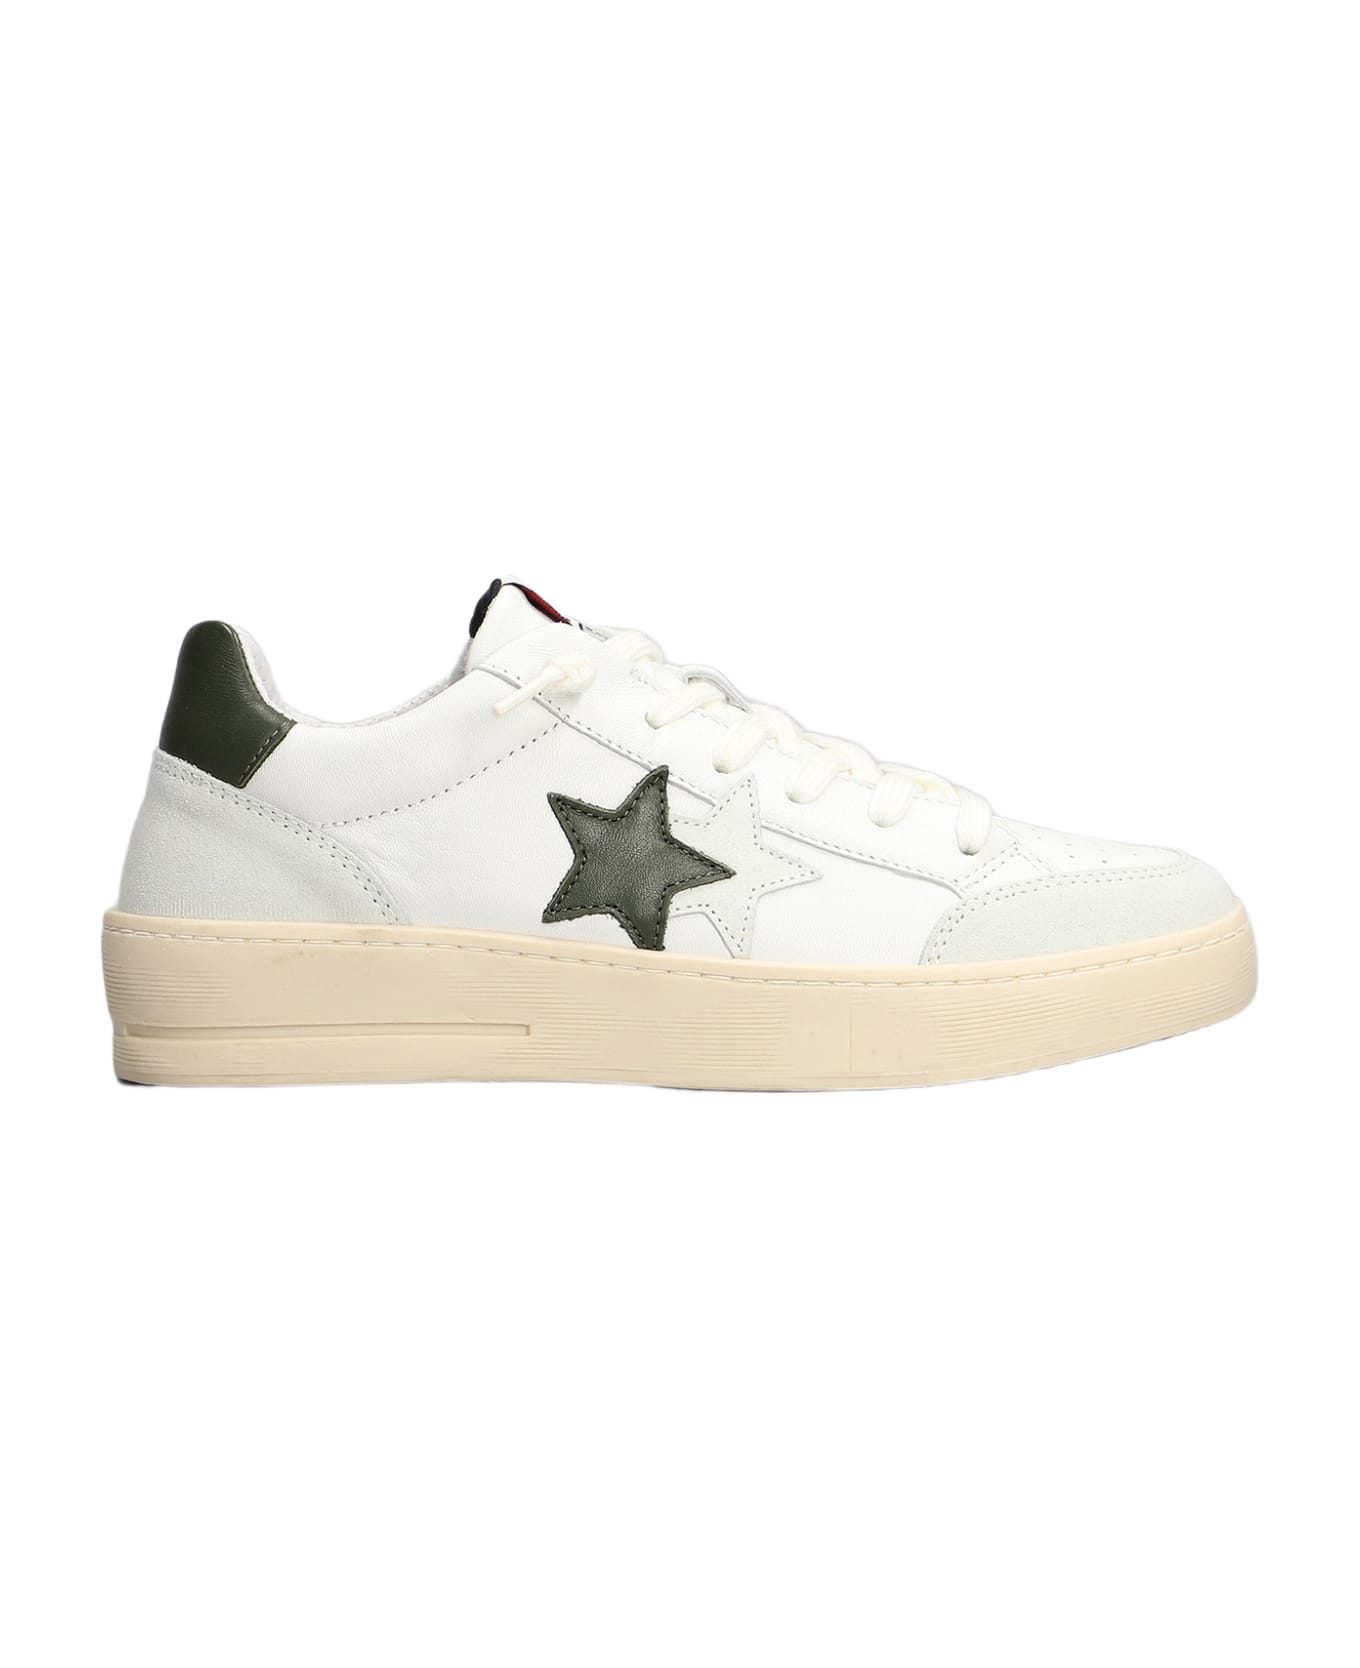 2Star New Star Sneakers In White Suede And Leather - white スニーカー